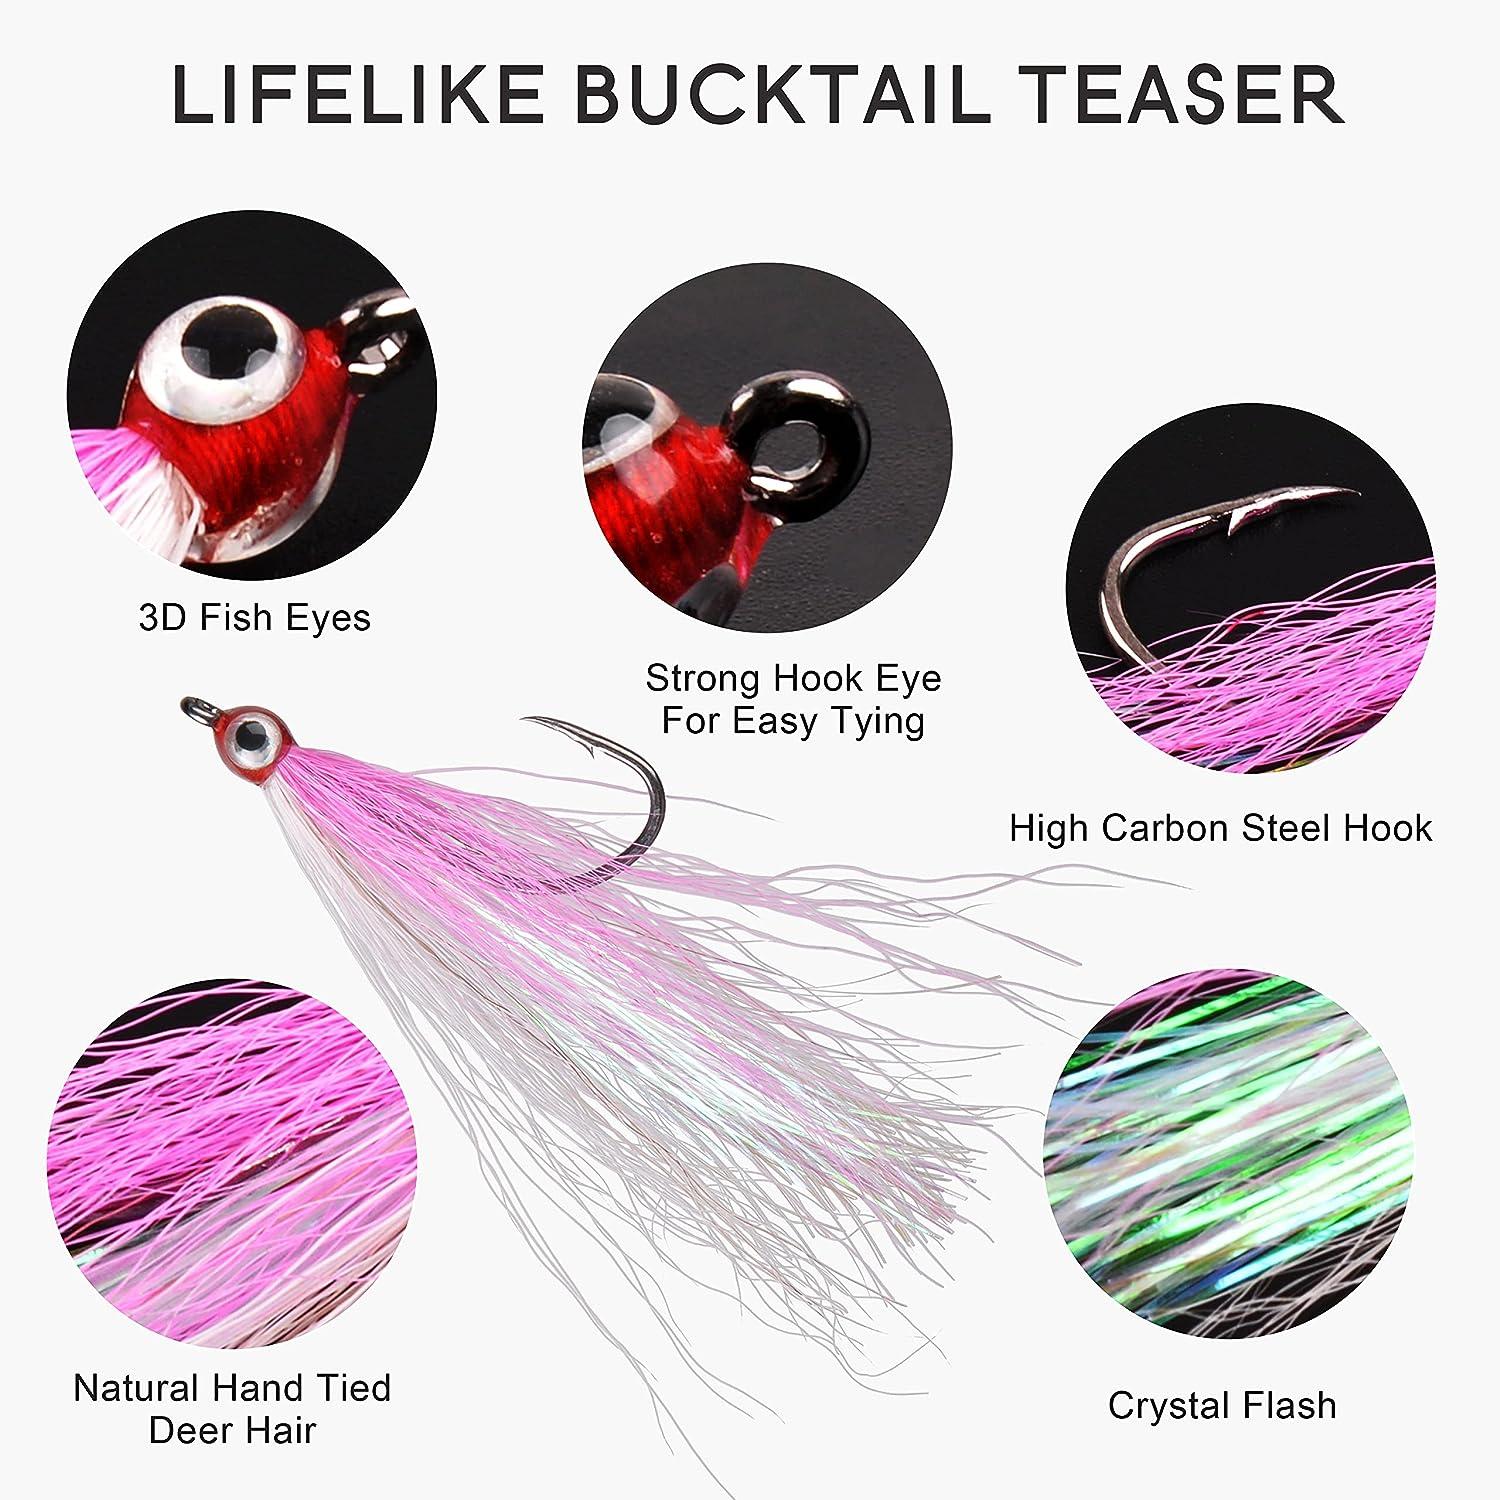 5Pcs Bucktail Teasers Fishing Hooks Stainless Steel Hook And Fishing Plugs  Lures Buck Tail Jig Lures Rig For Catfish Bass